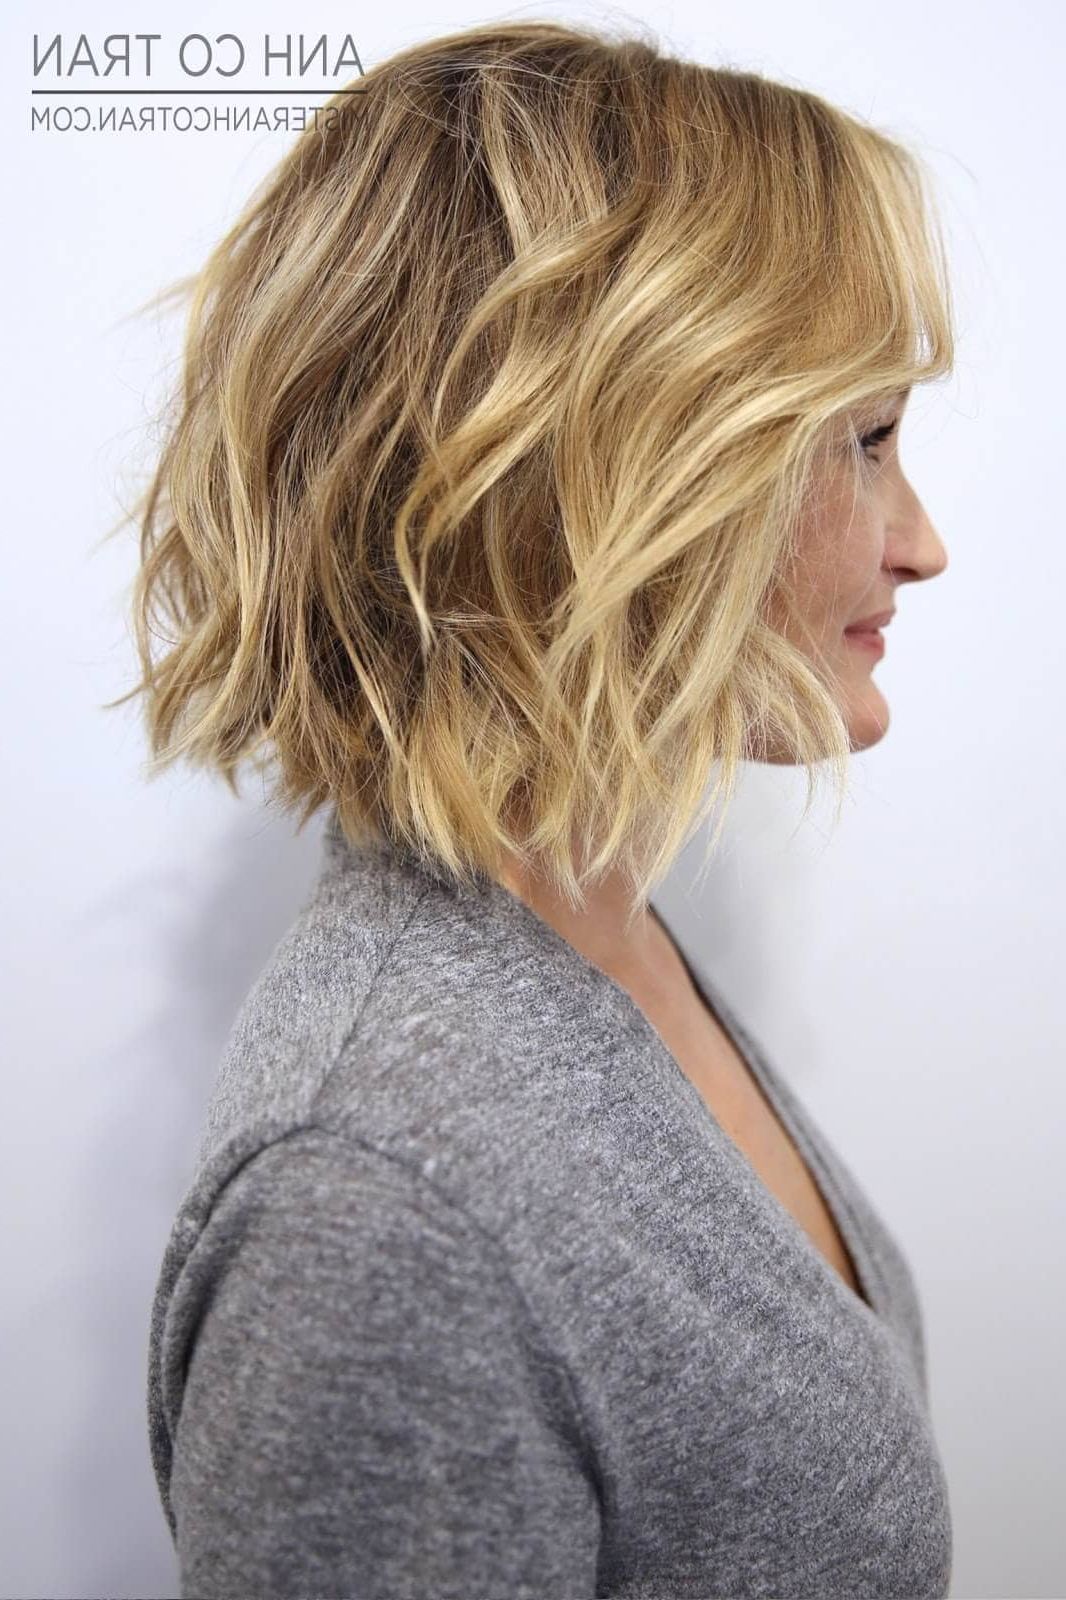 50 Ways To Wear Short Hair With Bangs For A Fresh New Look Intended For Short Haircuts With Bangs (View 25 of 25)